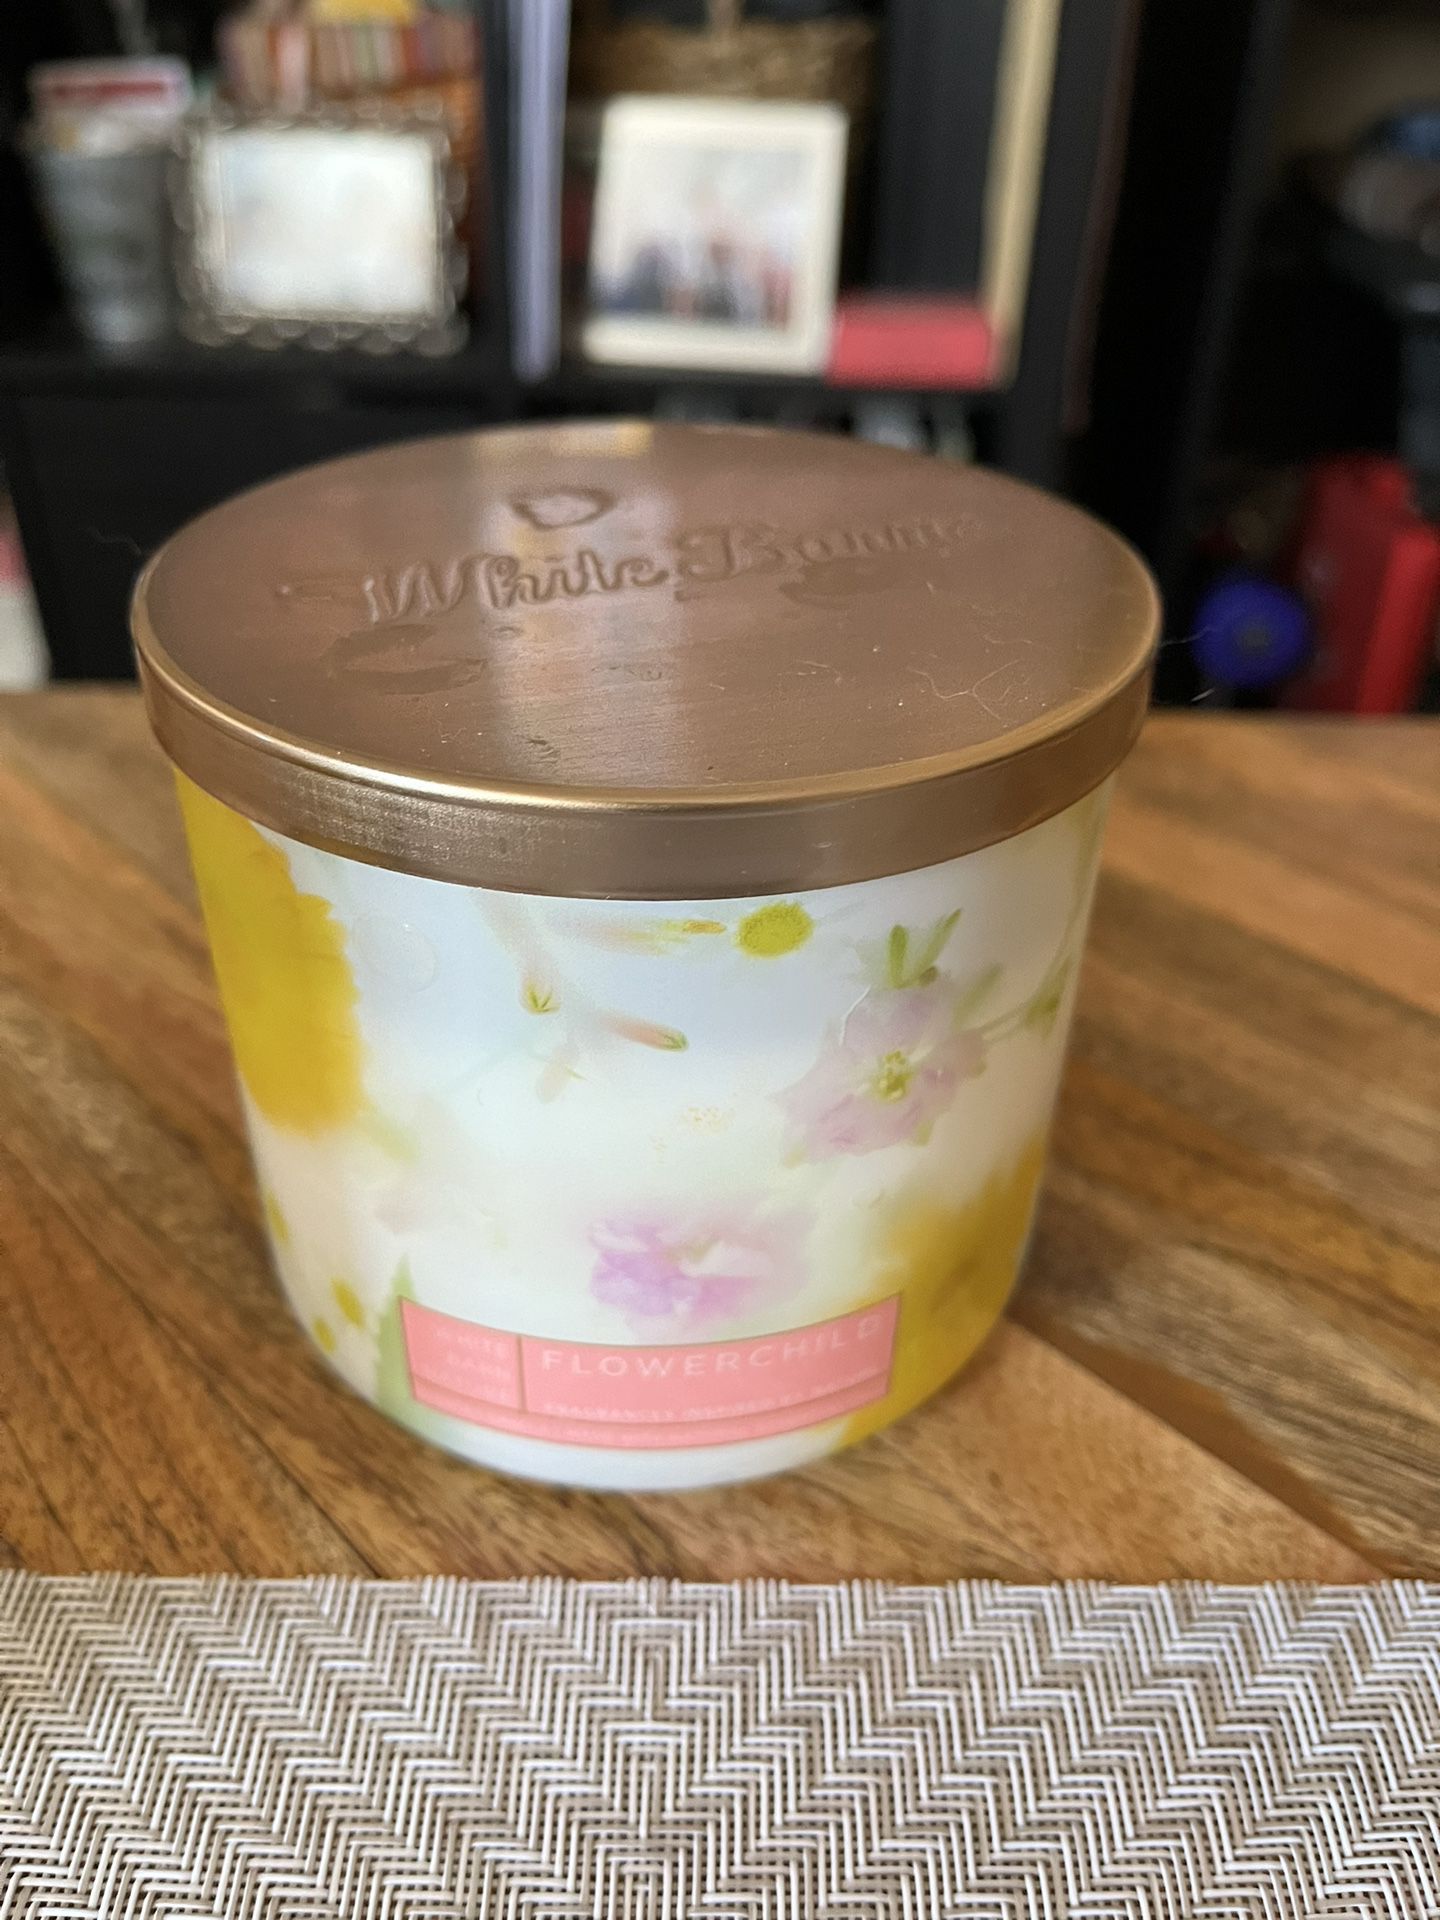 Bath And Body Candle 